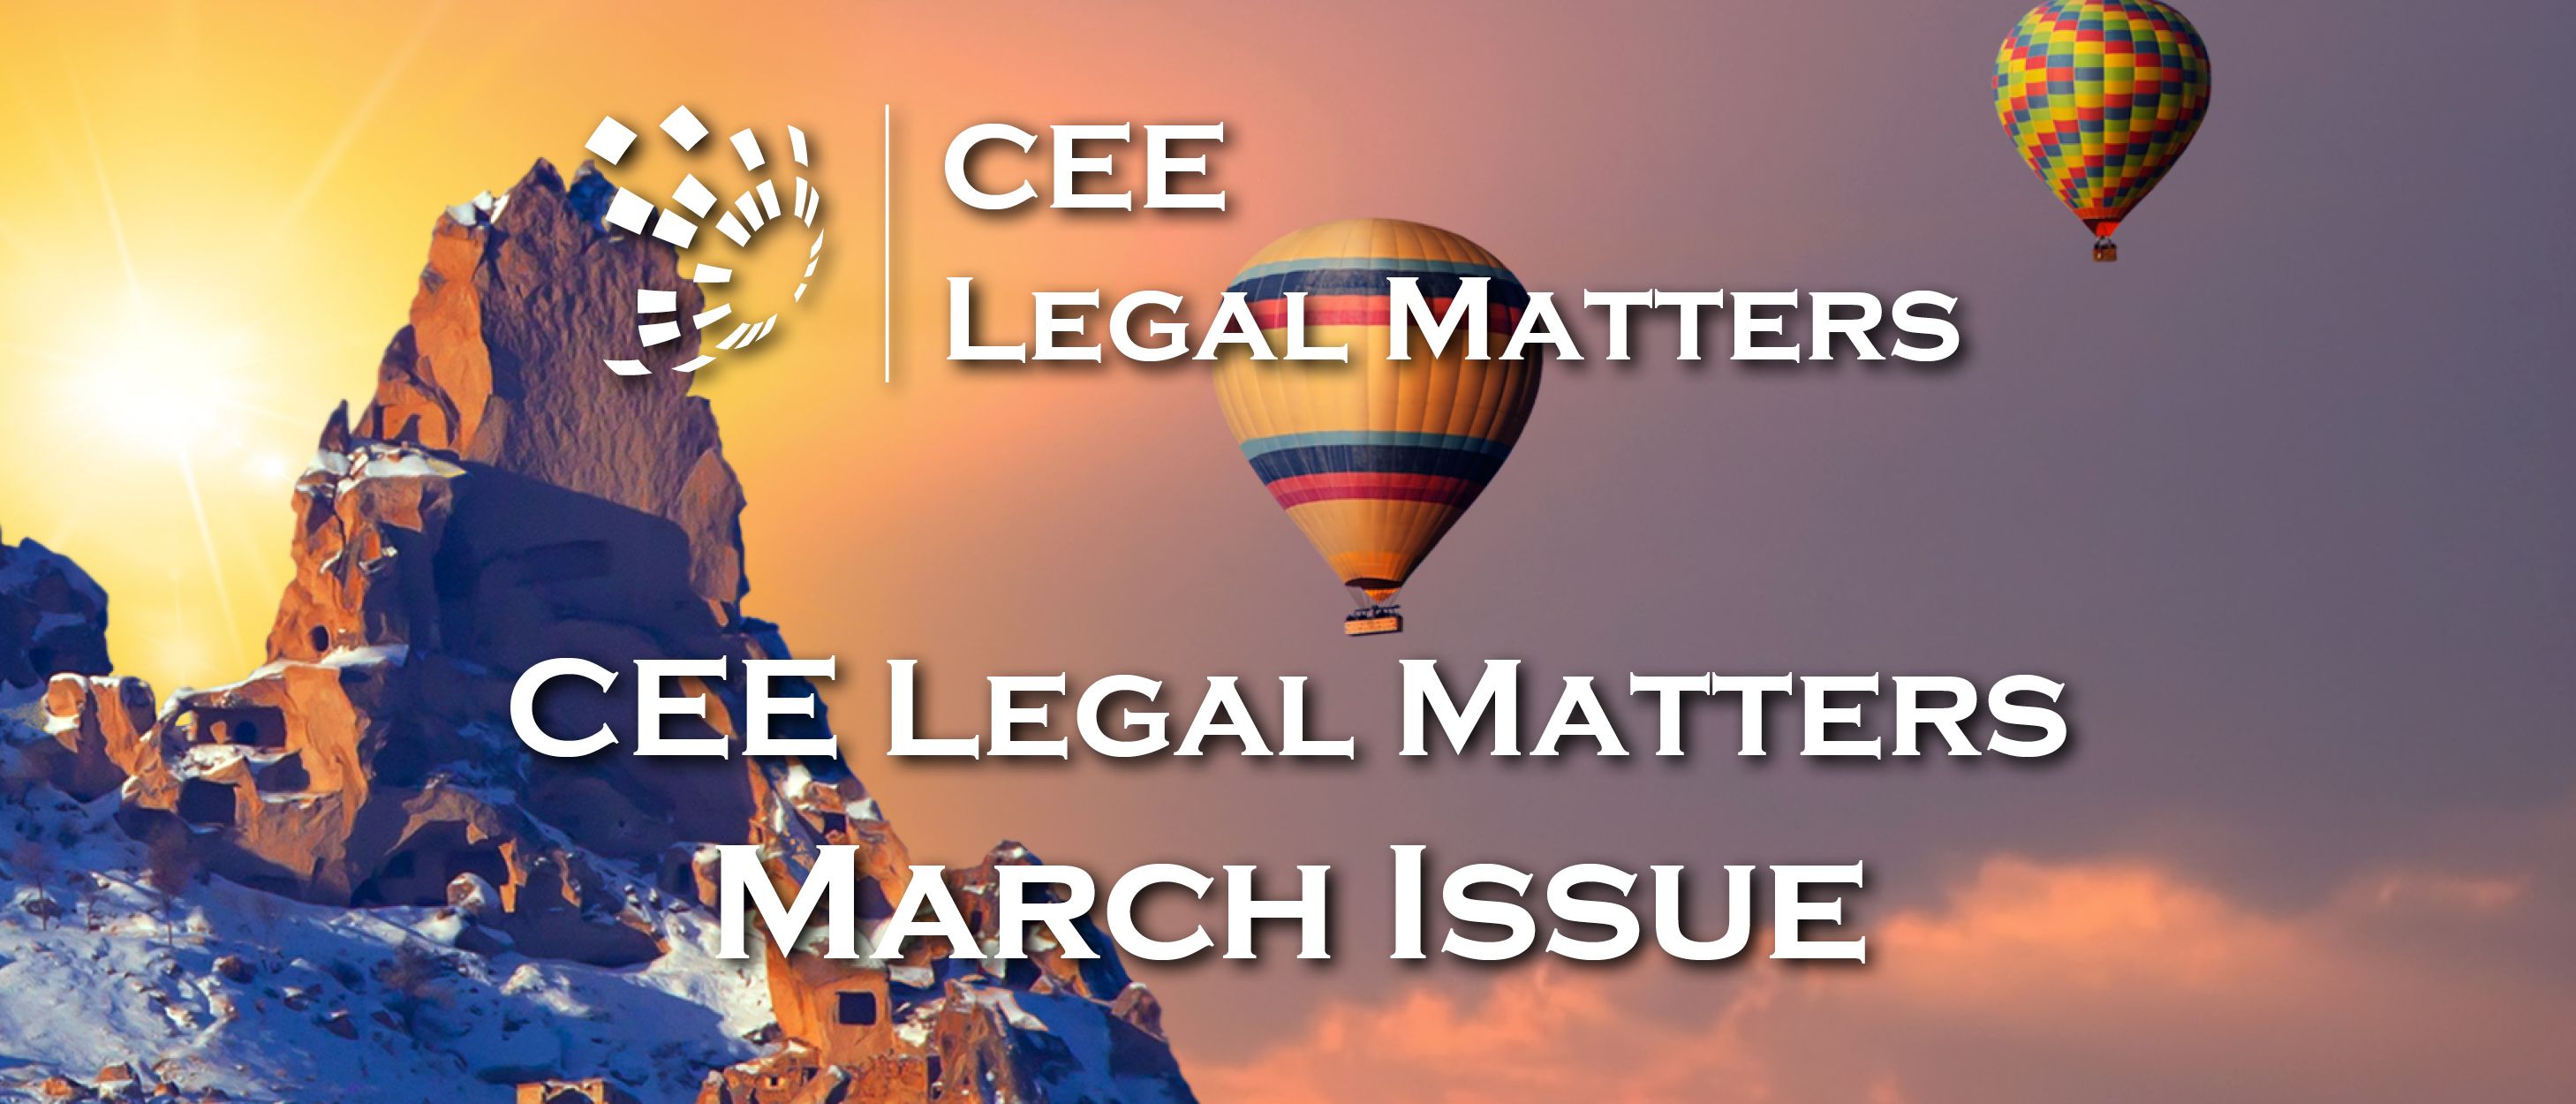 CEE Legal Matters Issue 6.2